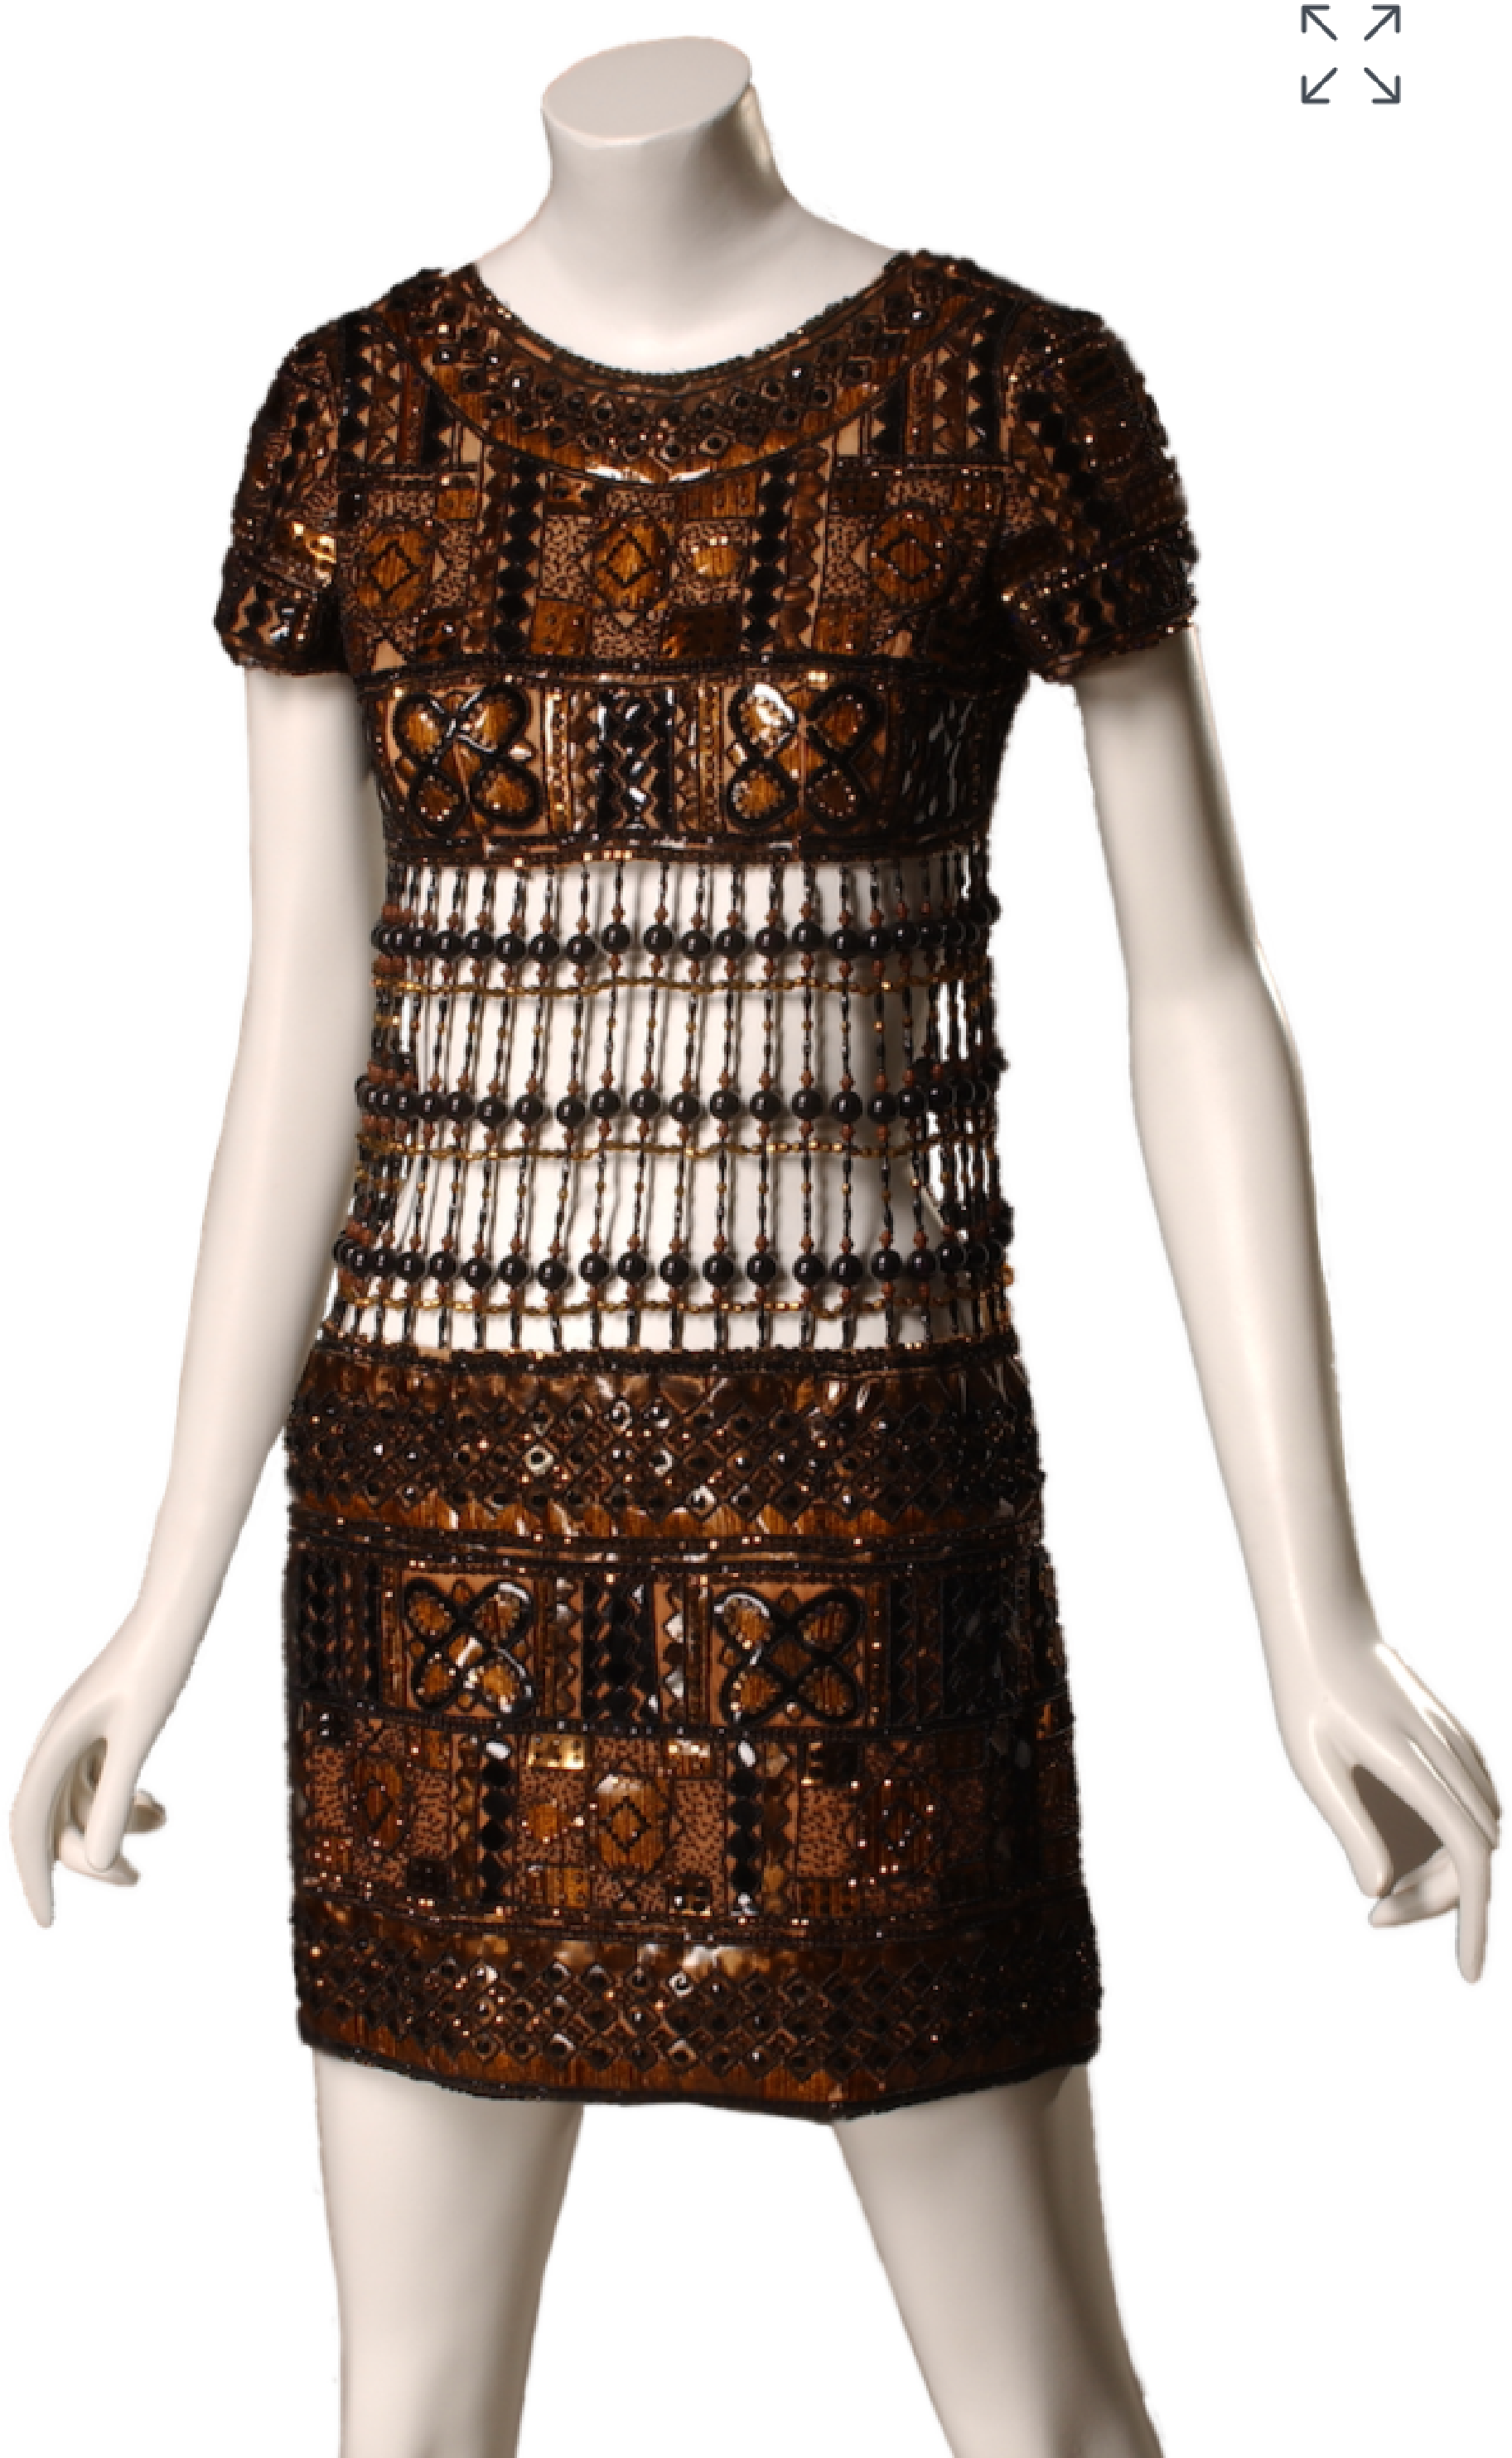 Side view of 1967 Yves Saint Laurent short sleeve brown beaded and embroidered mini evening dress. The mid-section of the dress is cut out and the bodice and skirt are attached using beading.